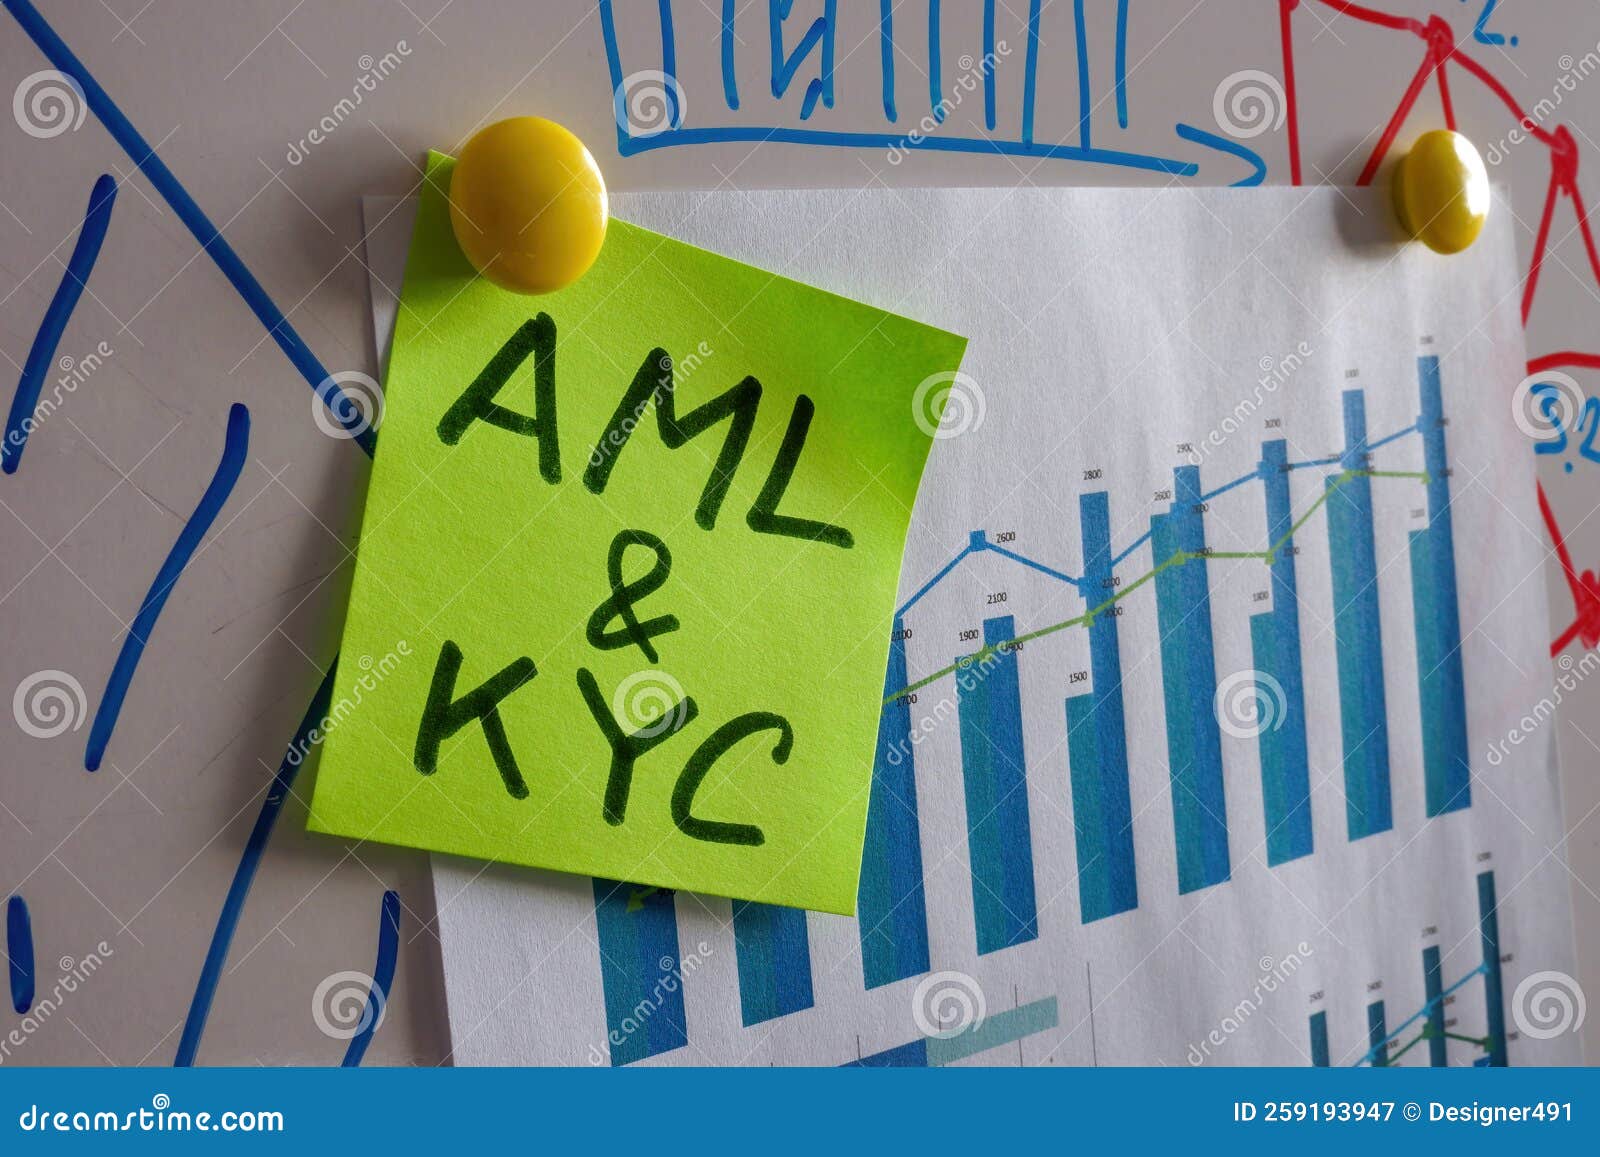 aml and kyc sticker on the whiteboard with financial data.